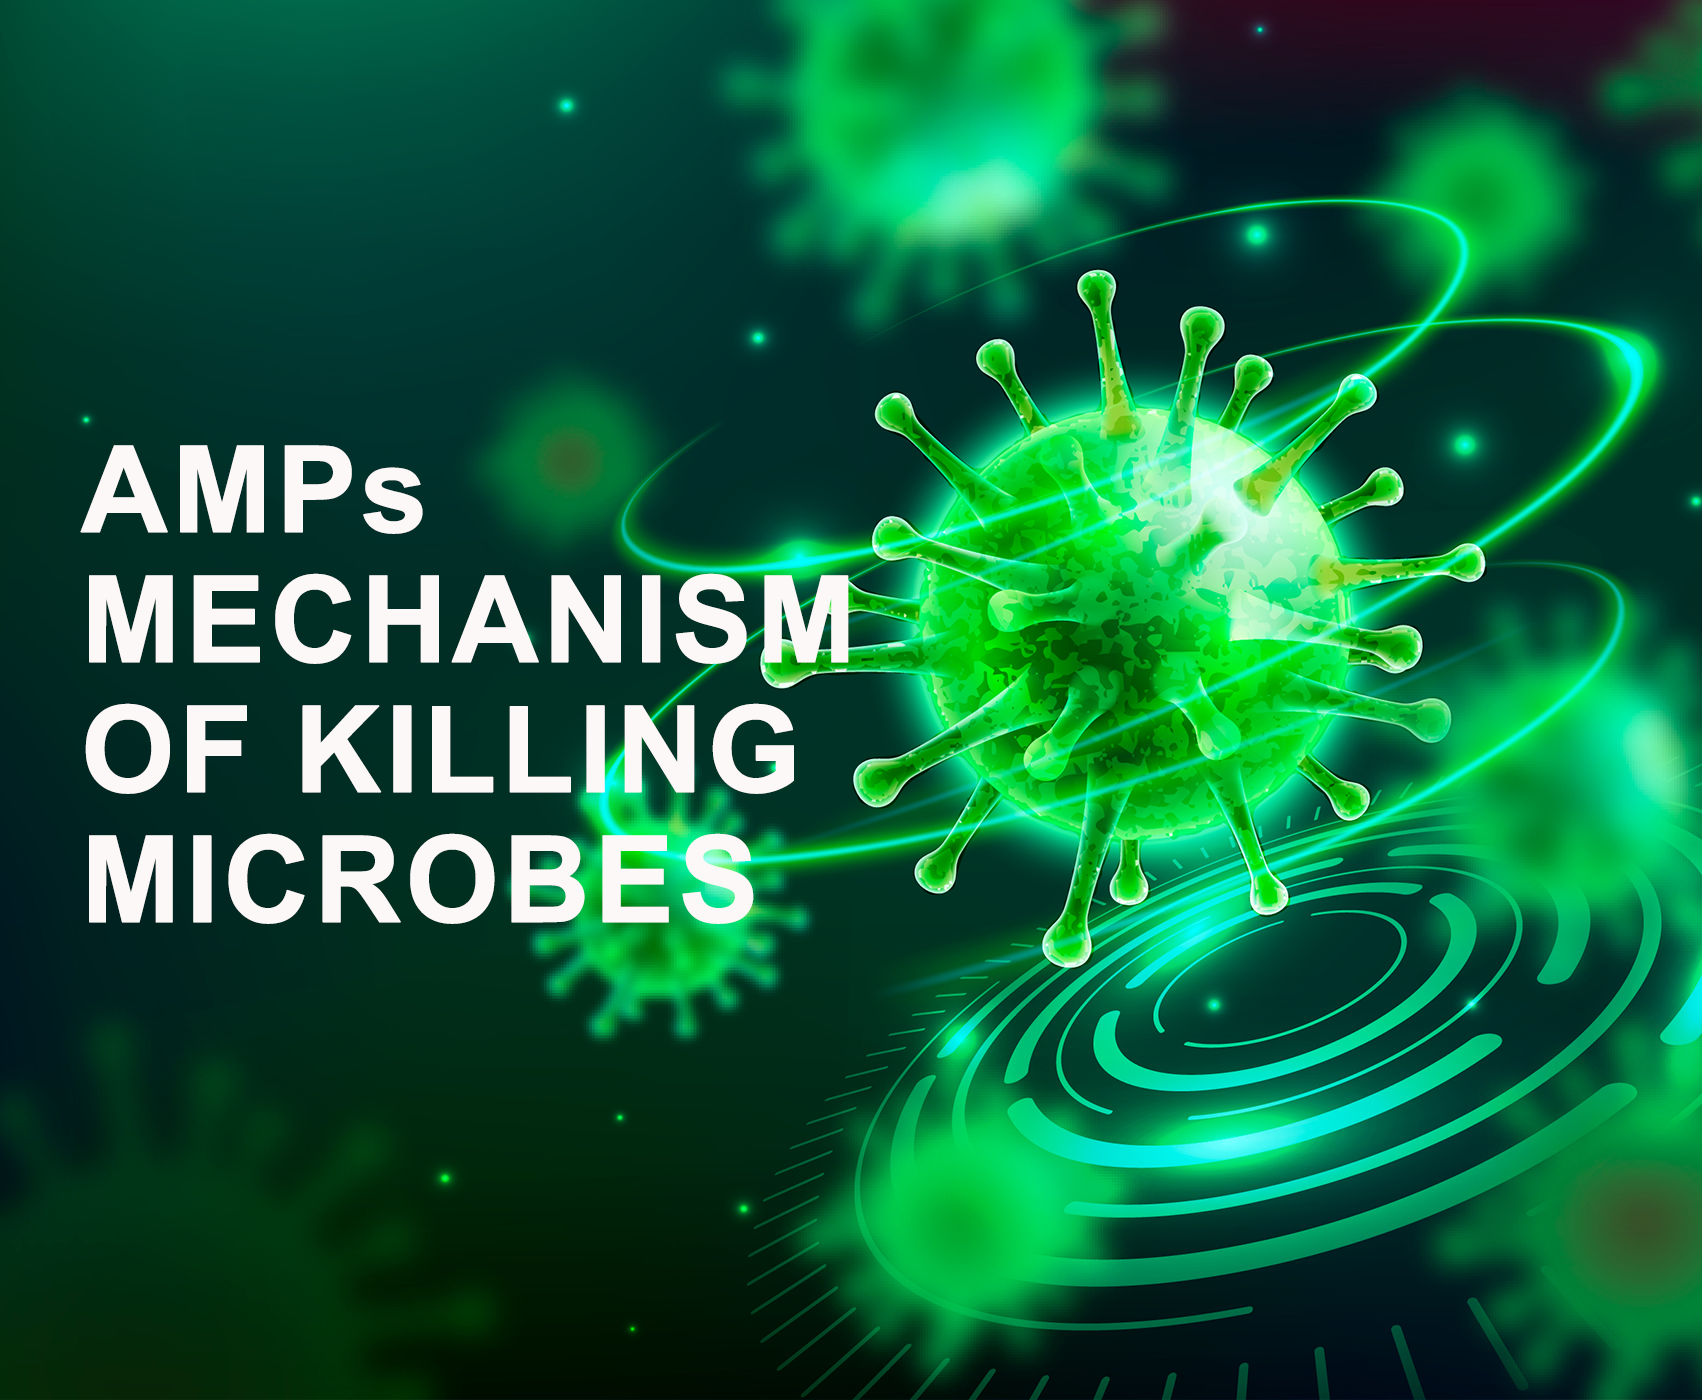 AMPs Mechanism of Killing Microbes